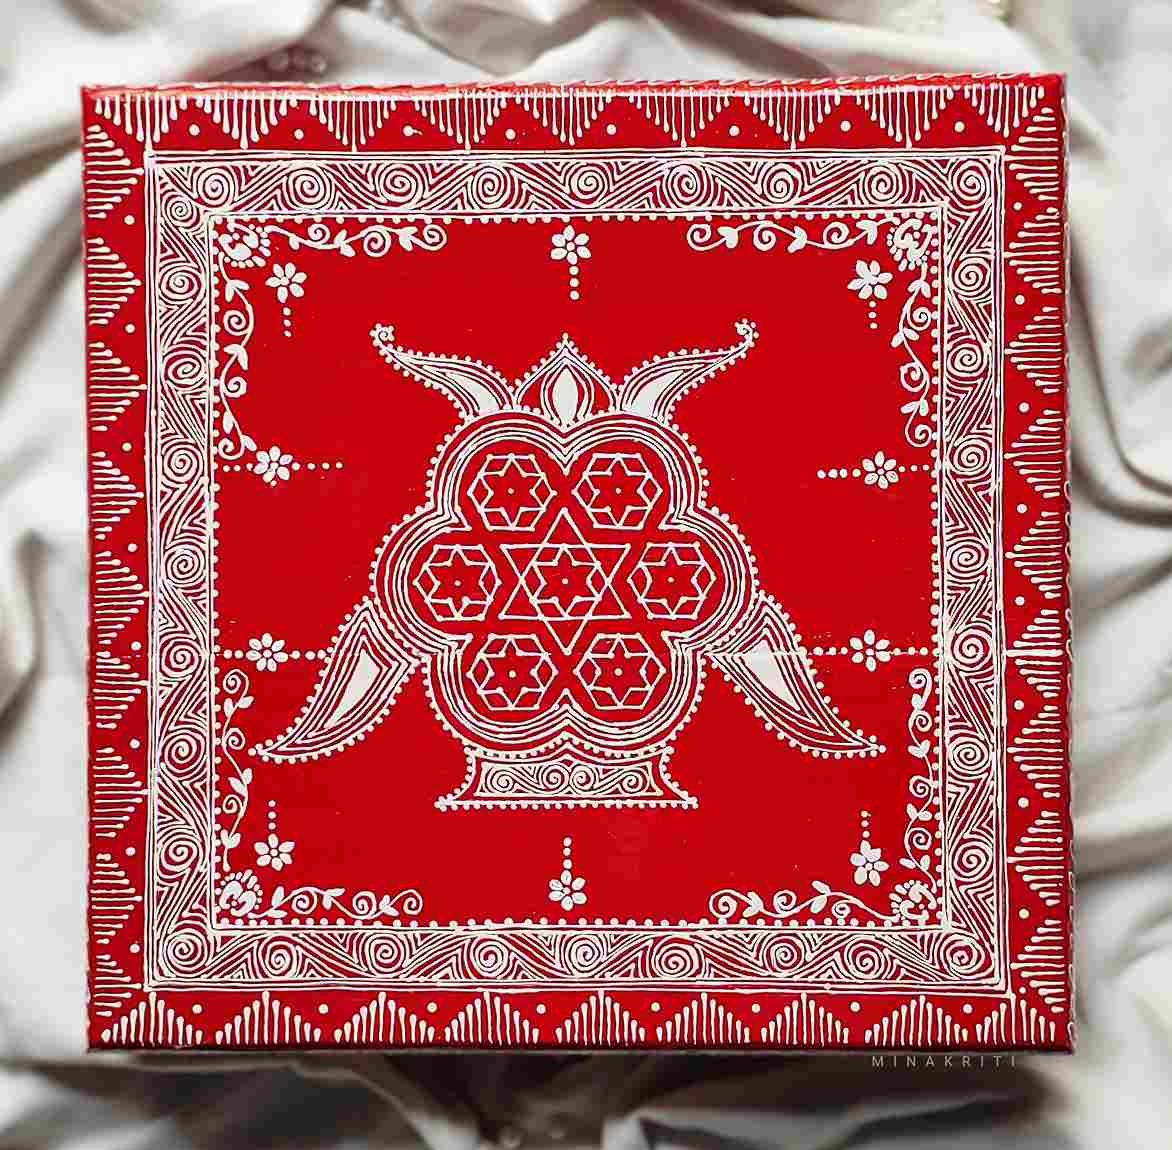 Aipan art that is made with rice flour on a red background as a traditional art form in Uttarakhand